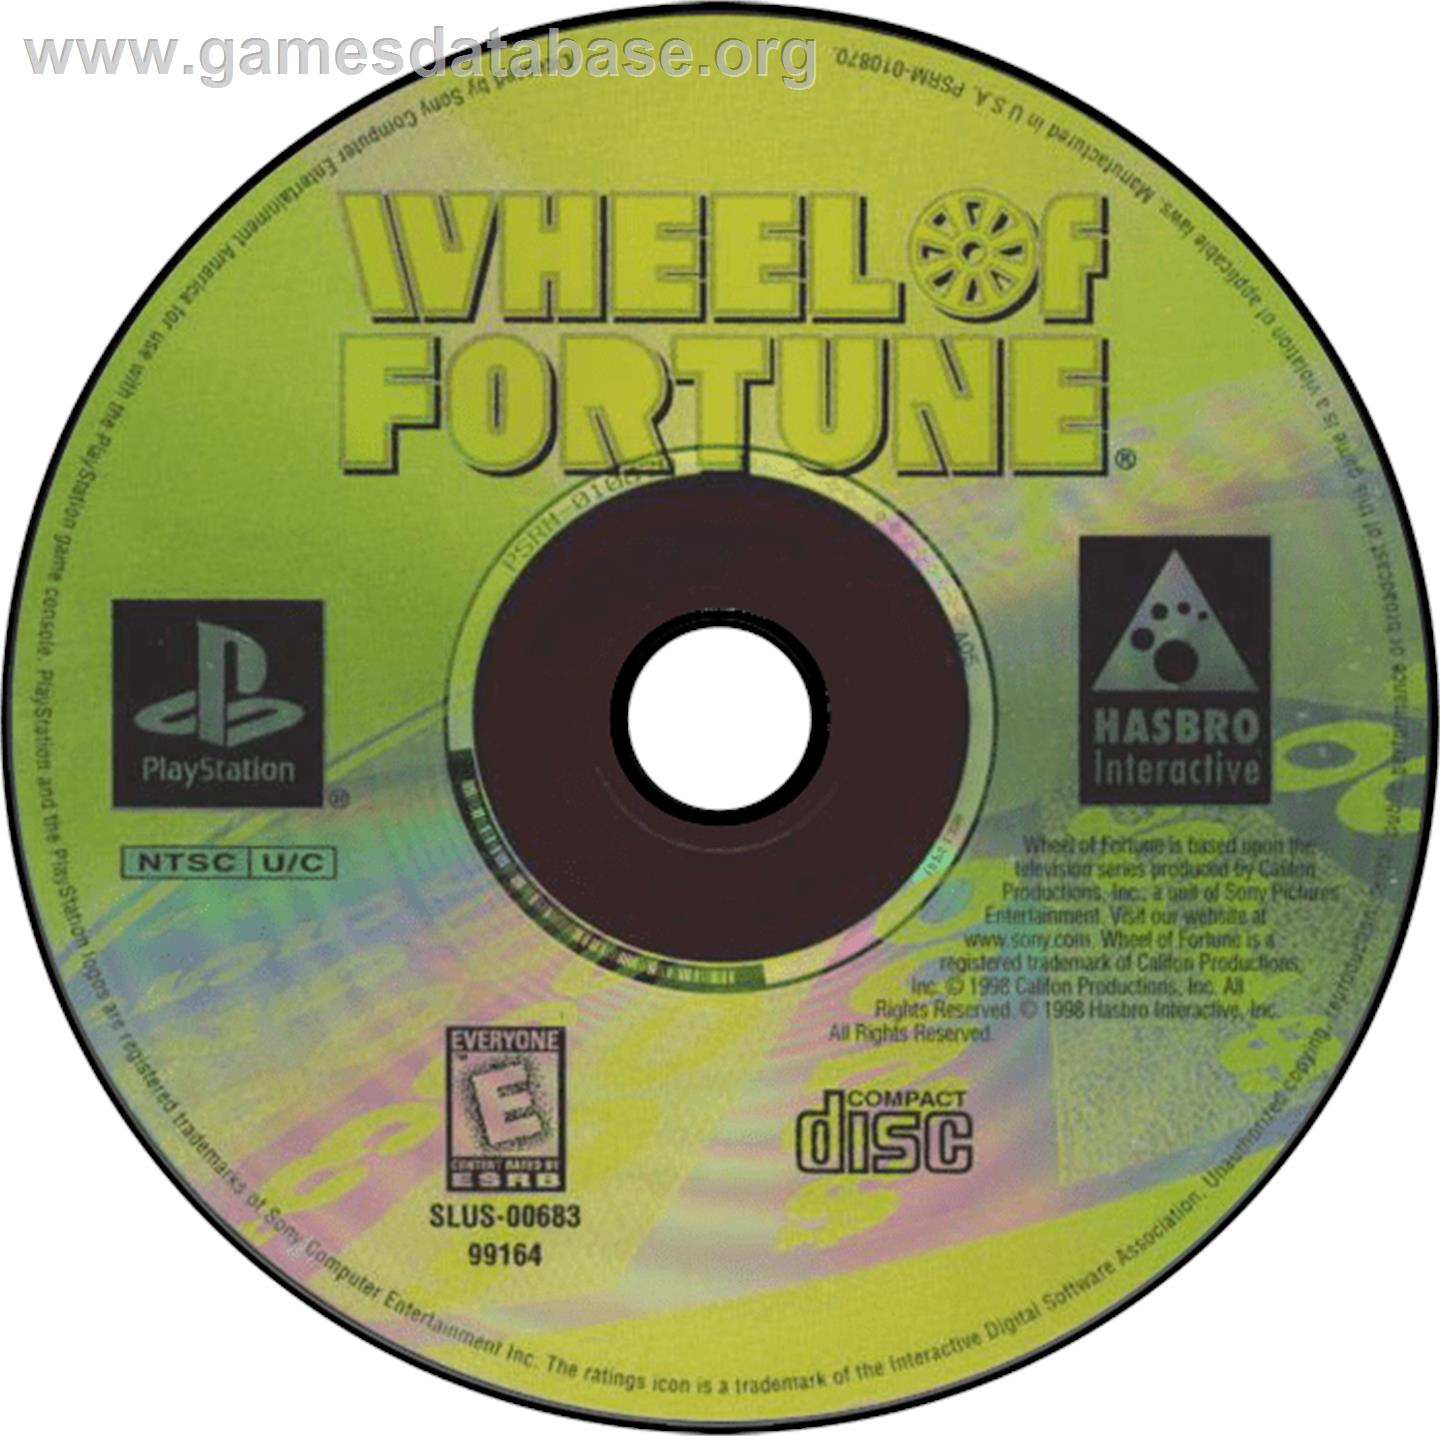 Wheel of Fortune: 2nd Edition - Sony Playstation - Artwork - Disc